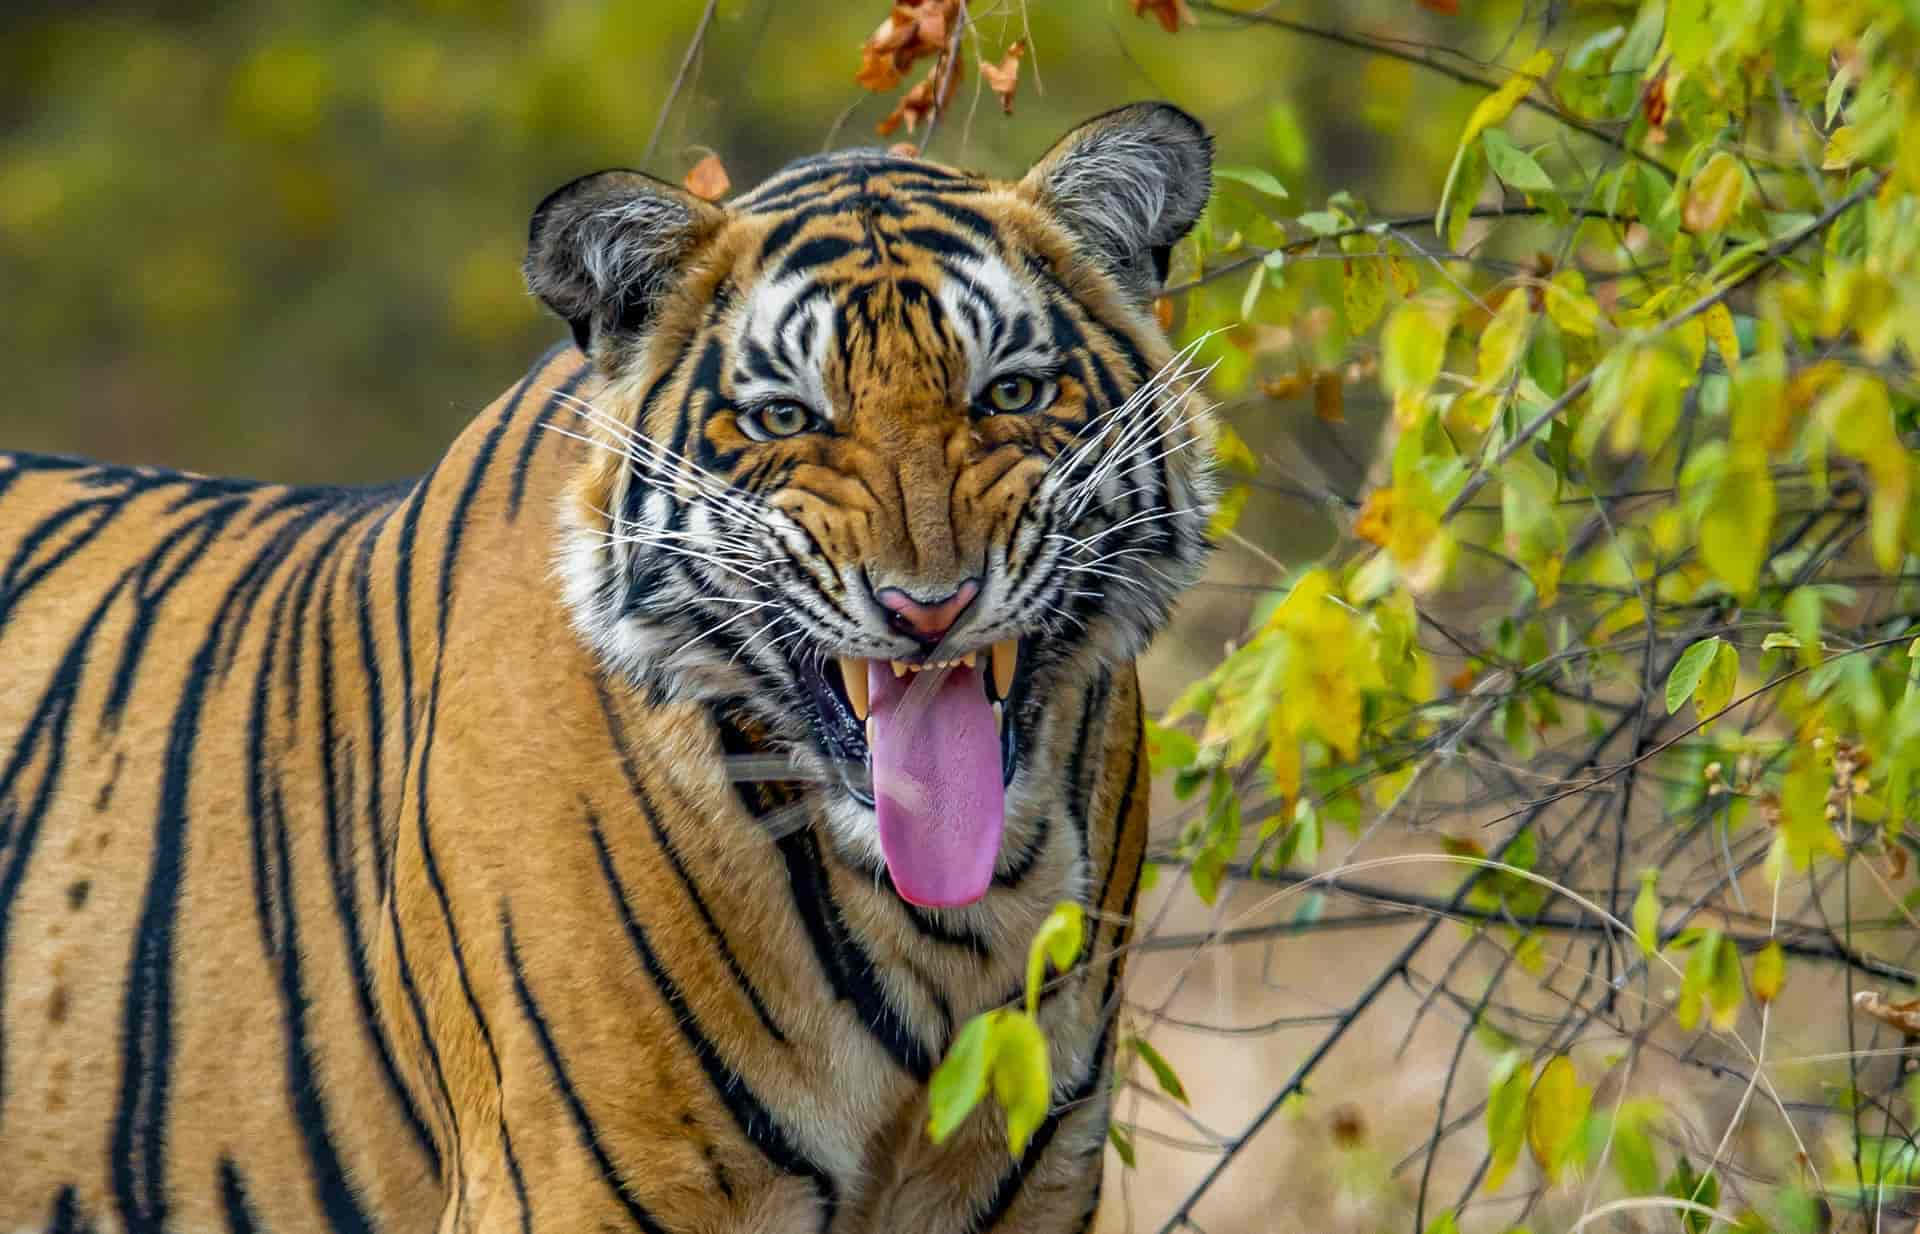 A Tiger Is Standing In The Woods With Its Tongue Out